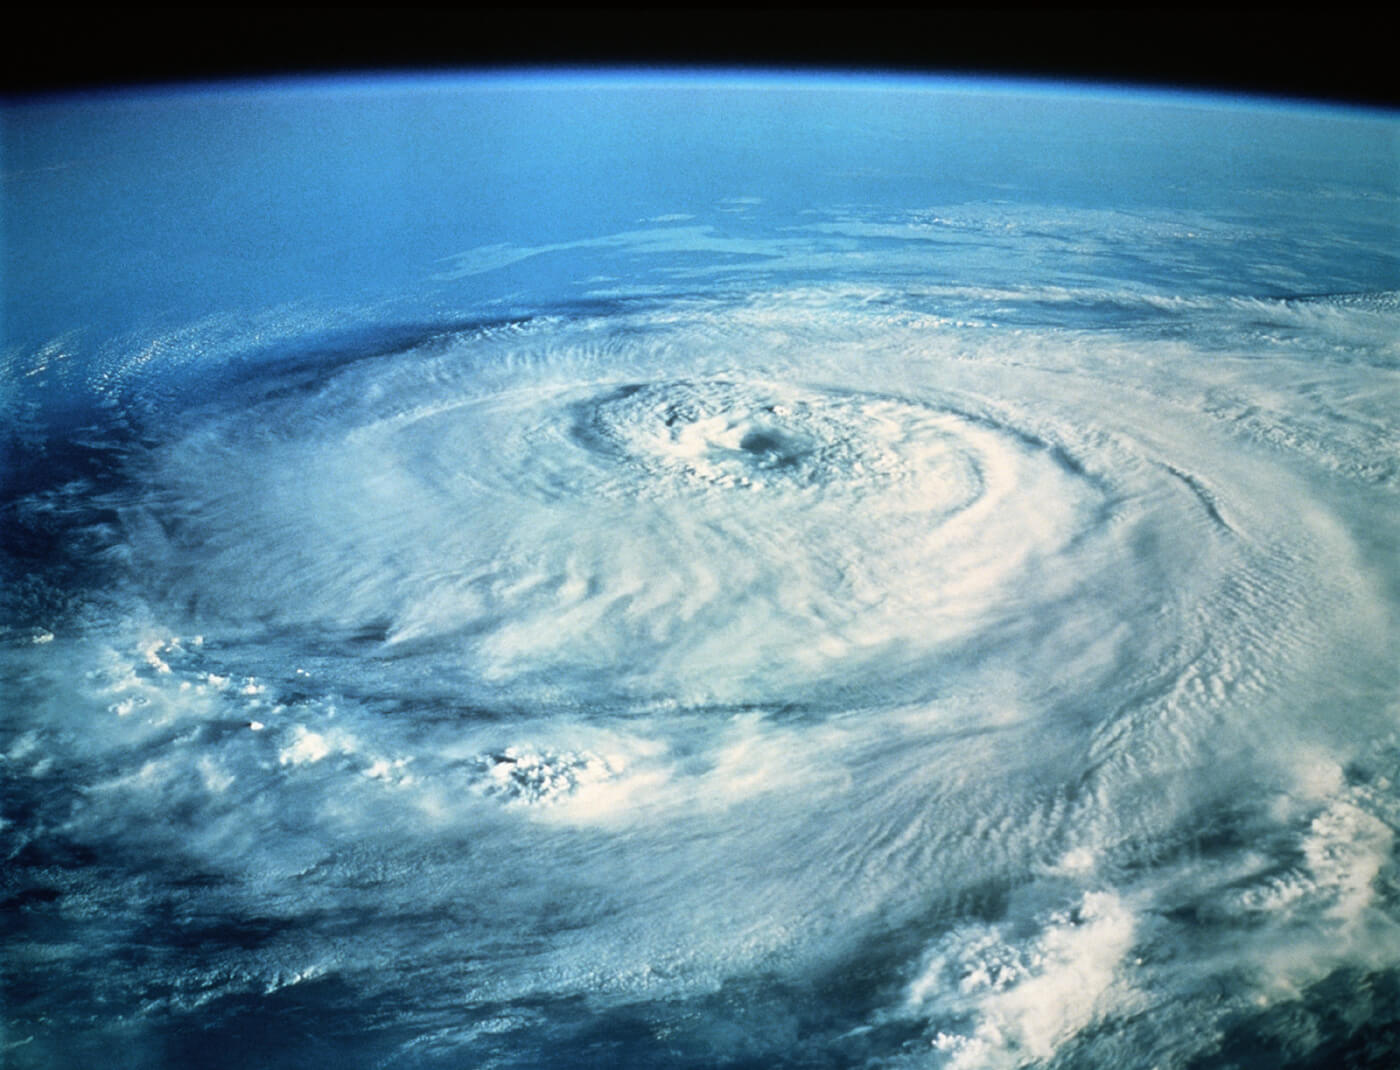 A Major Category 3 Storm being formed on earth surface as seen from outer space